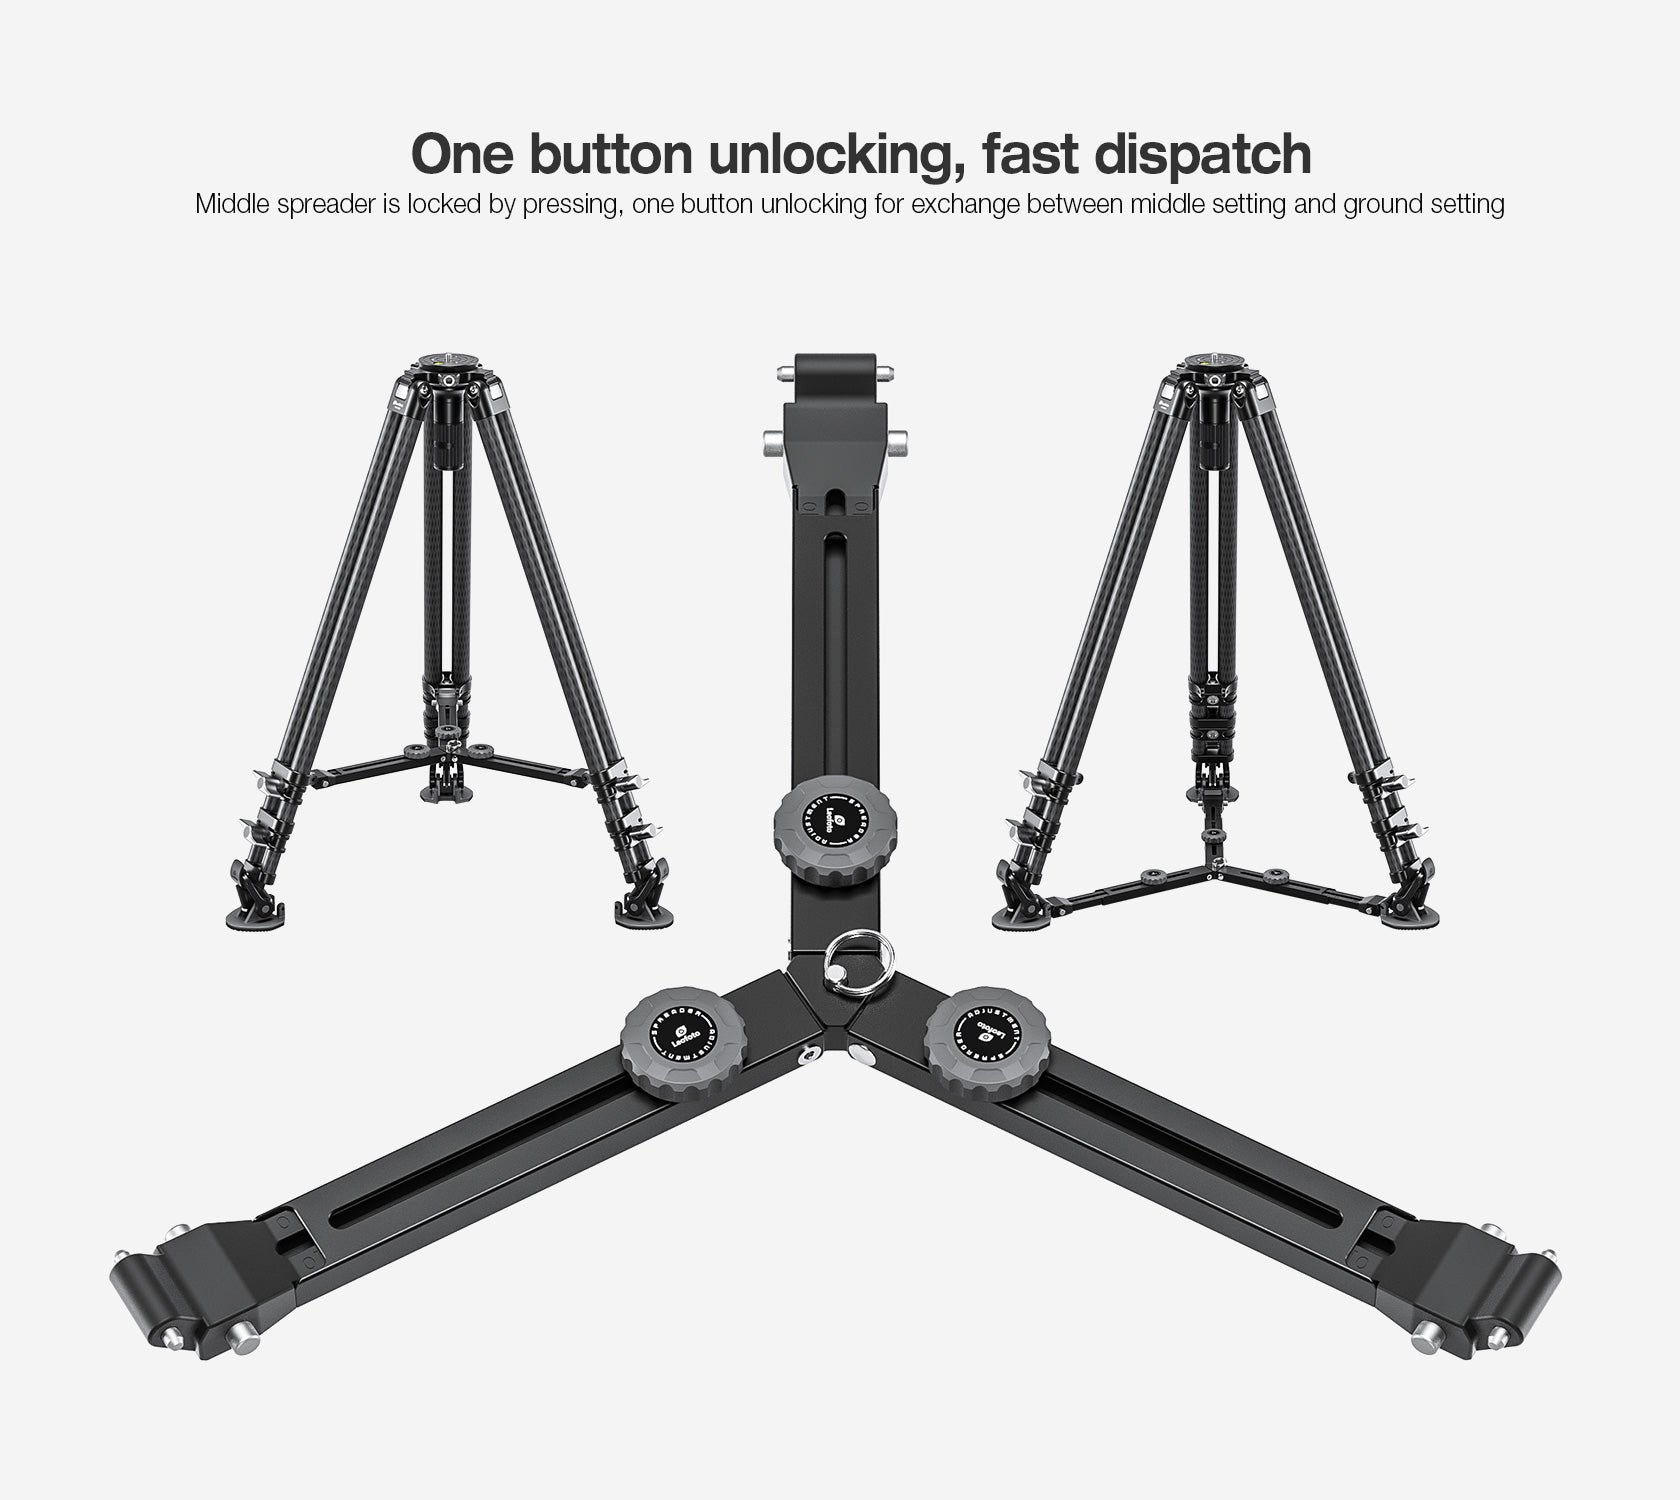 Leofoto LVC-193C+BV-15 Dual-Tube Video Tripod with Fluid Head Set  | 75mm Integrated Bowl with Leveling Base and Handle